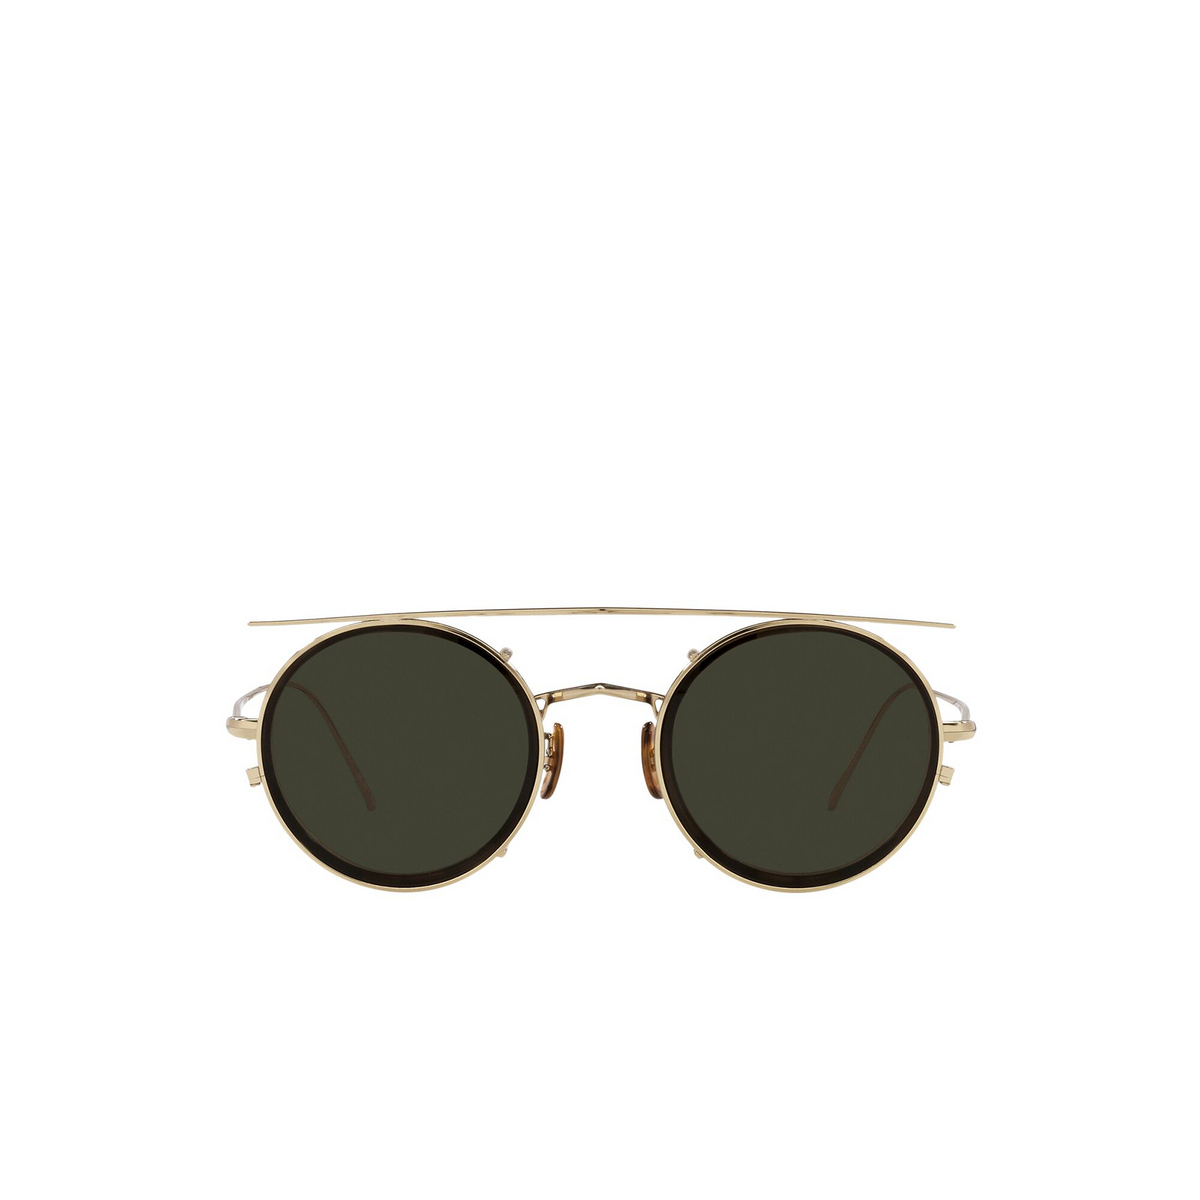 Oliver Peoples G. PONTI-2 Sunglasses 5035 Soft Gold - front view